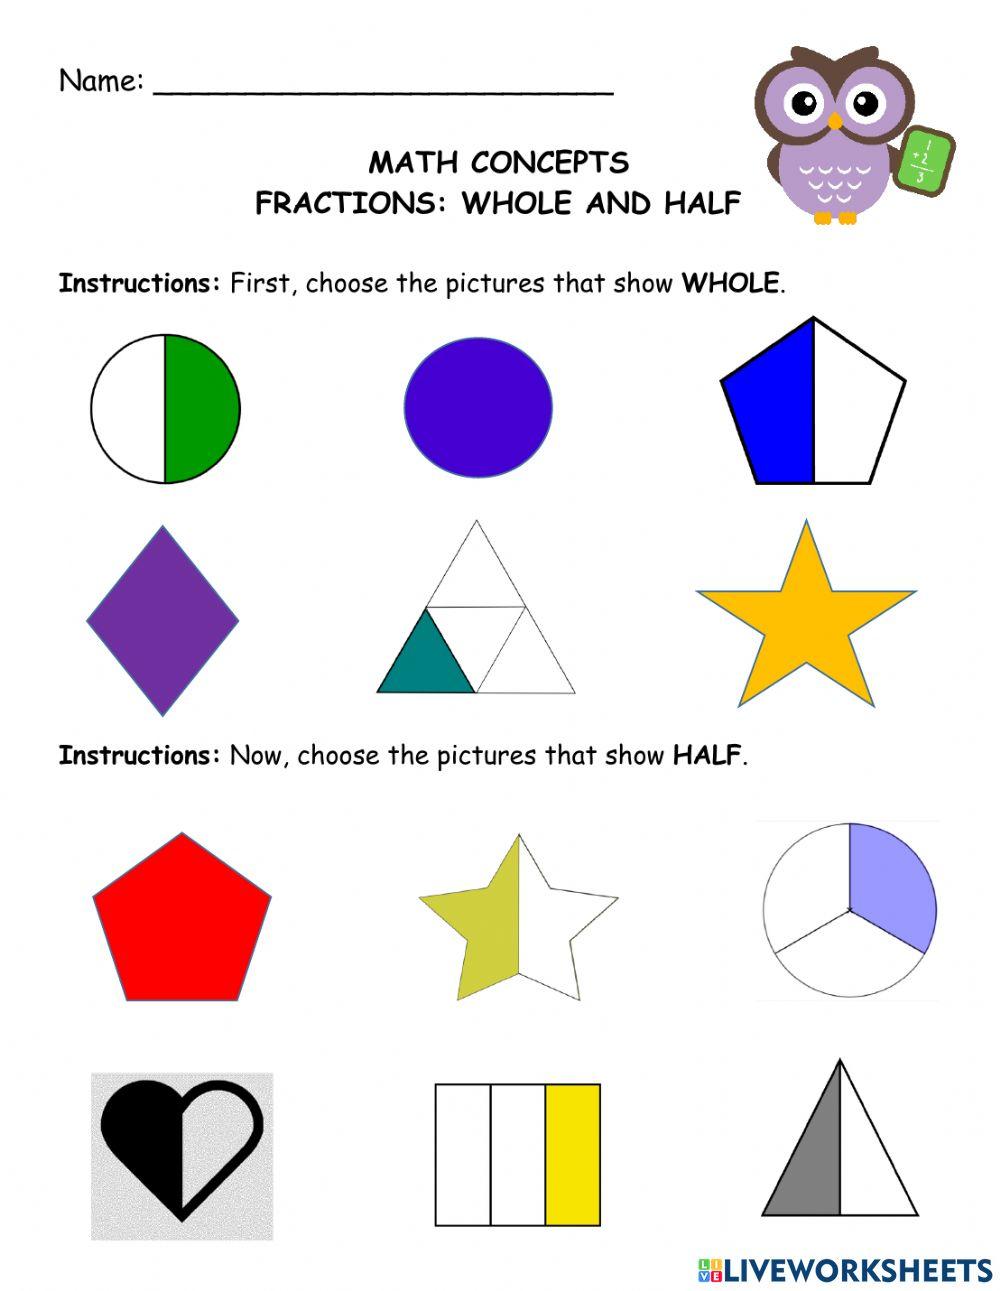 Fractions: Whole and Half